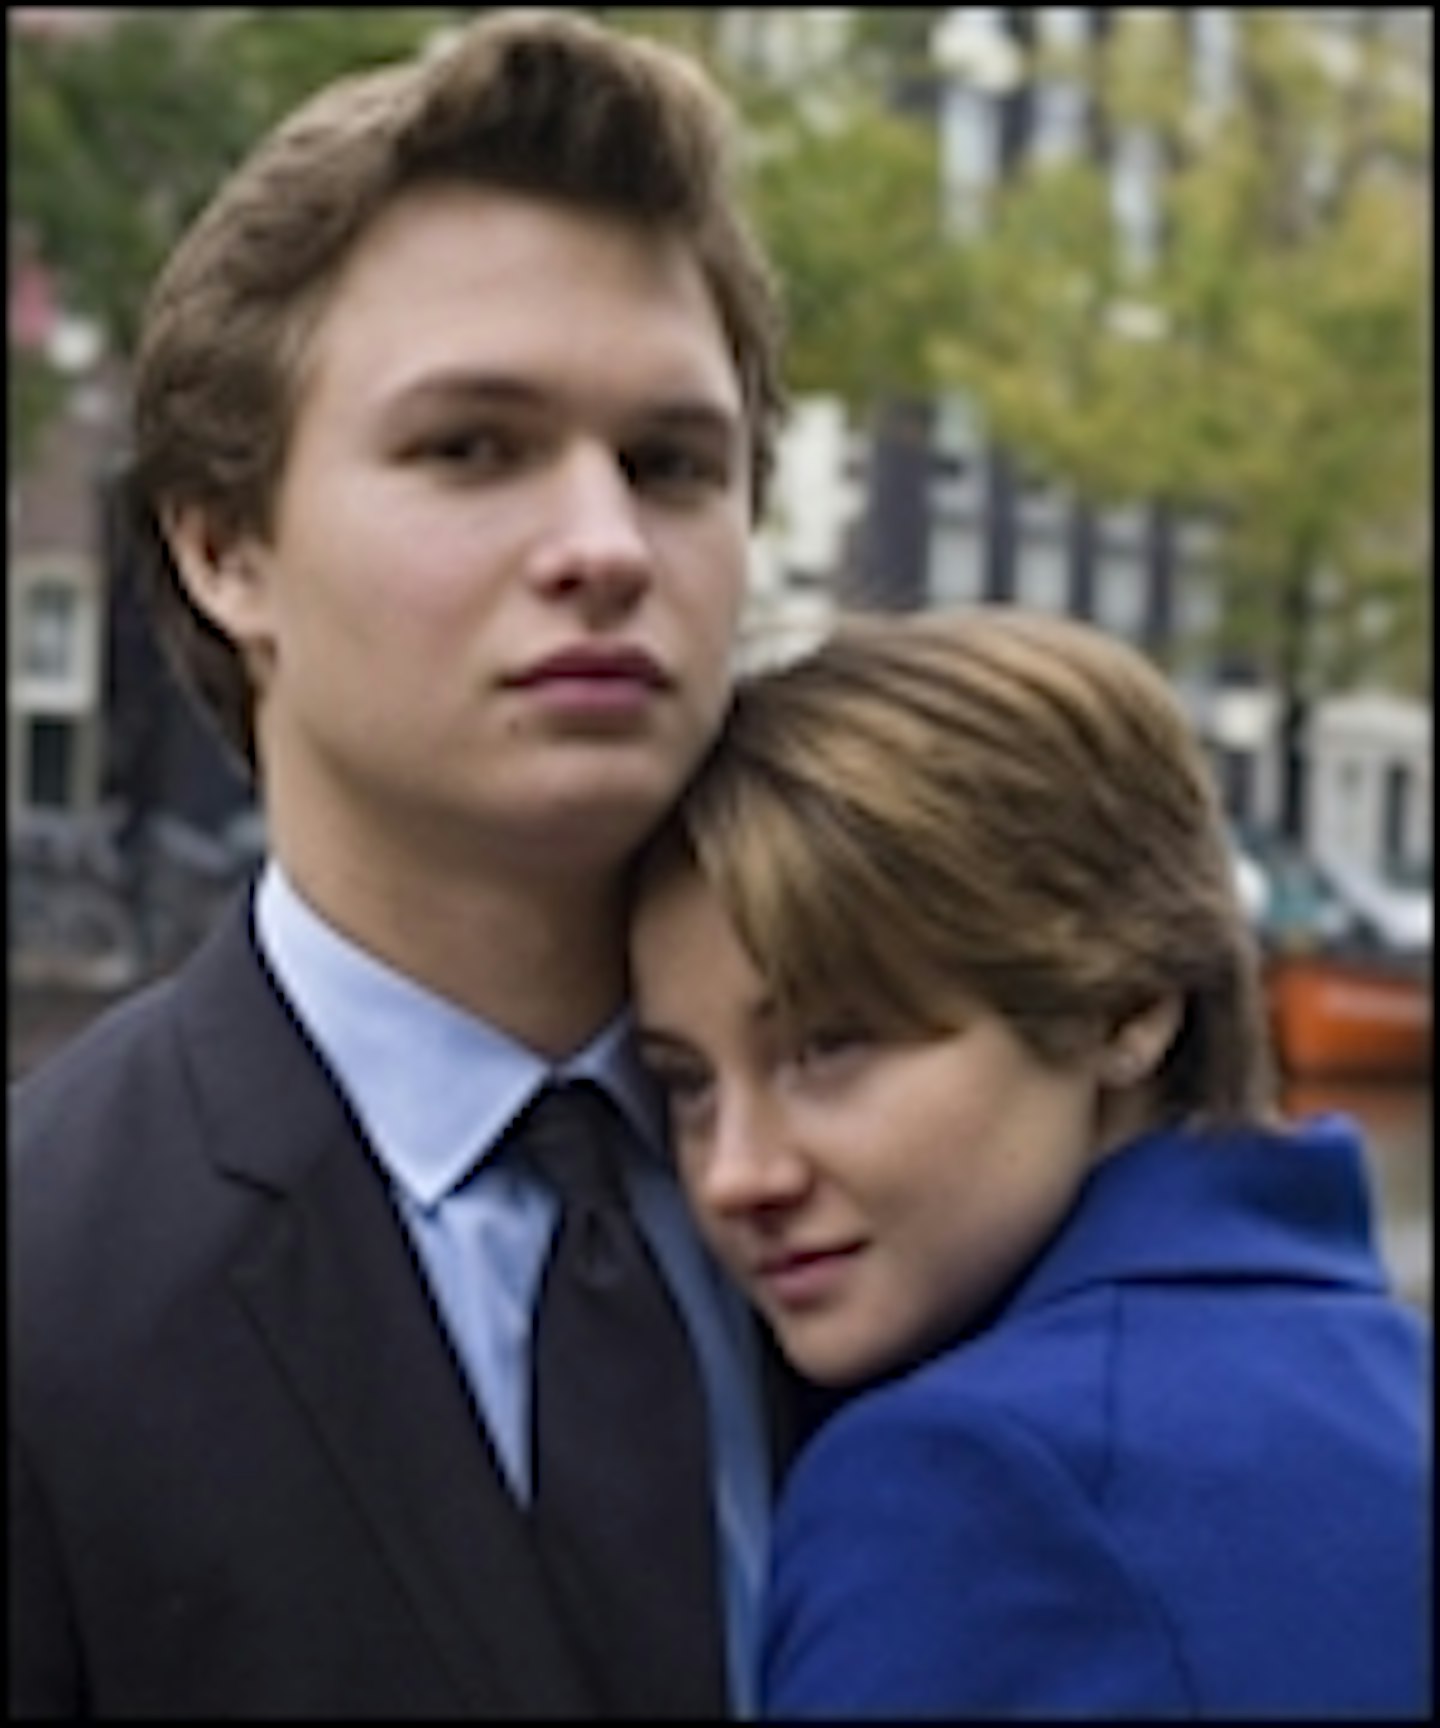 New Promo For The Fault In Our Stars